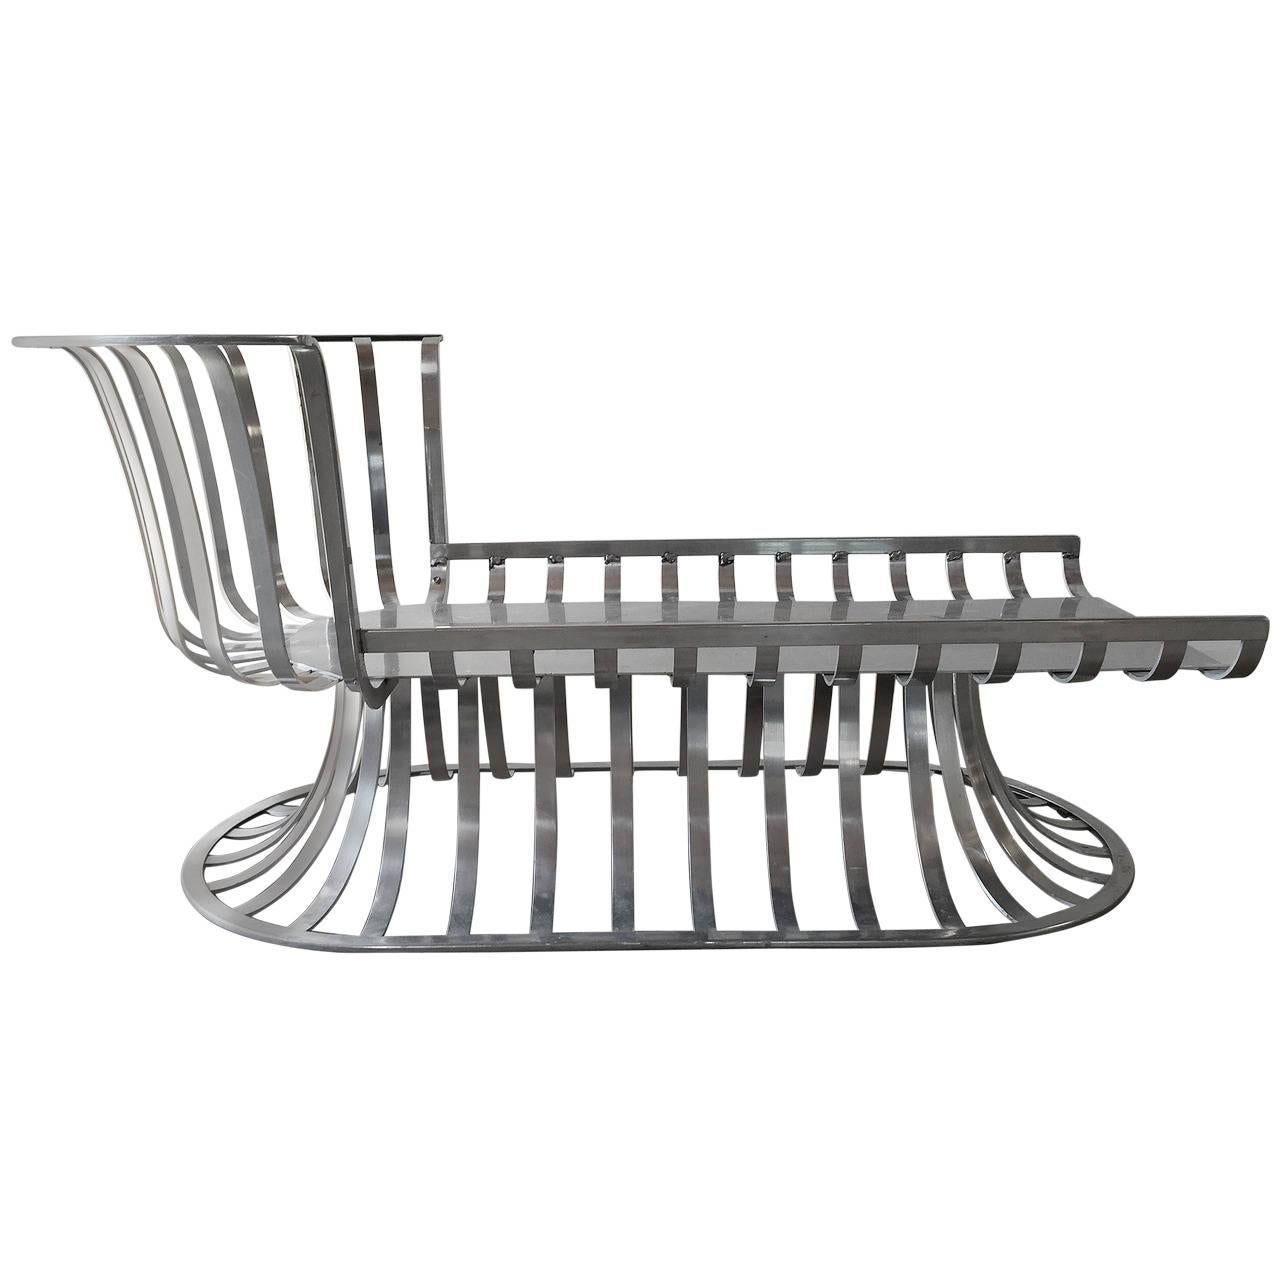 Less common to find. Original Russell Woodard Aluminum Chaise. Very clean. Just needs pillows fabricated for it. I have reference photos for what this looks like. Please email to request.